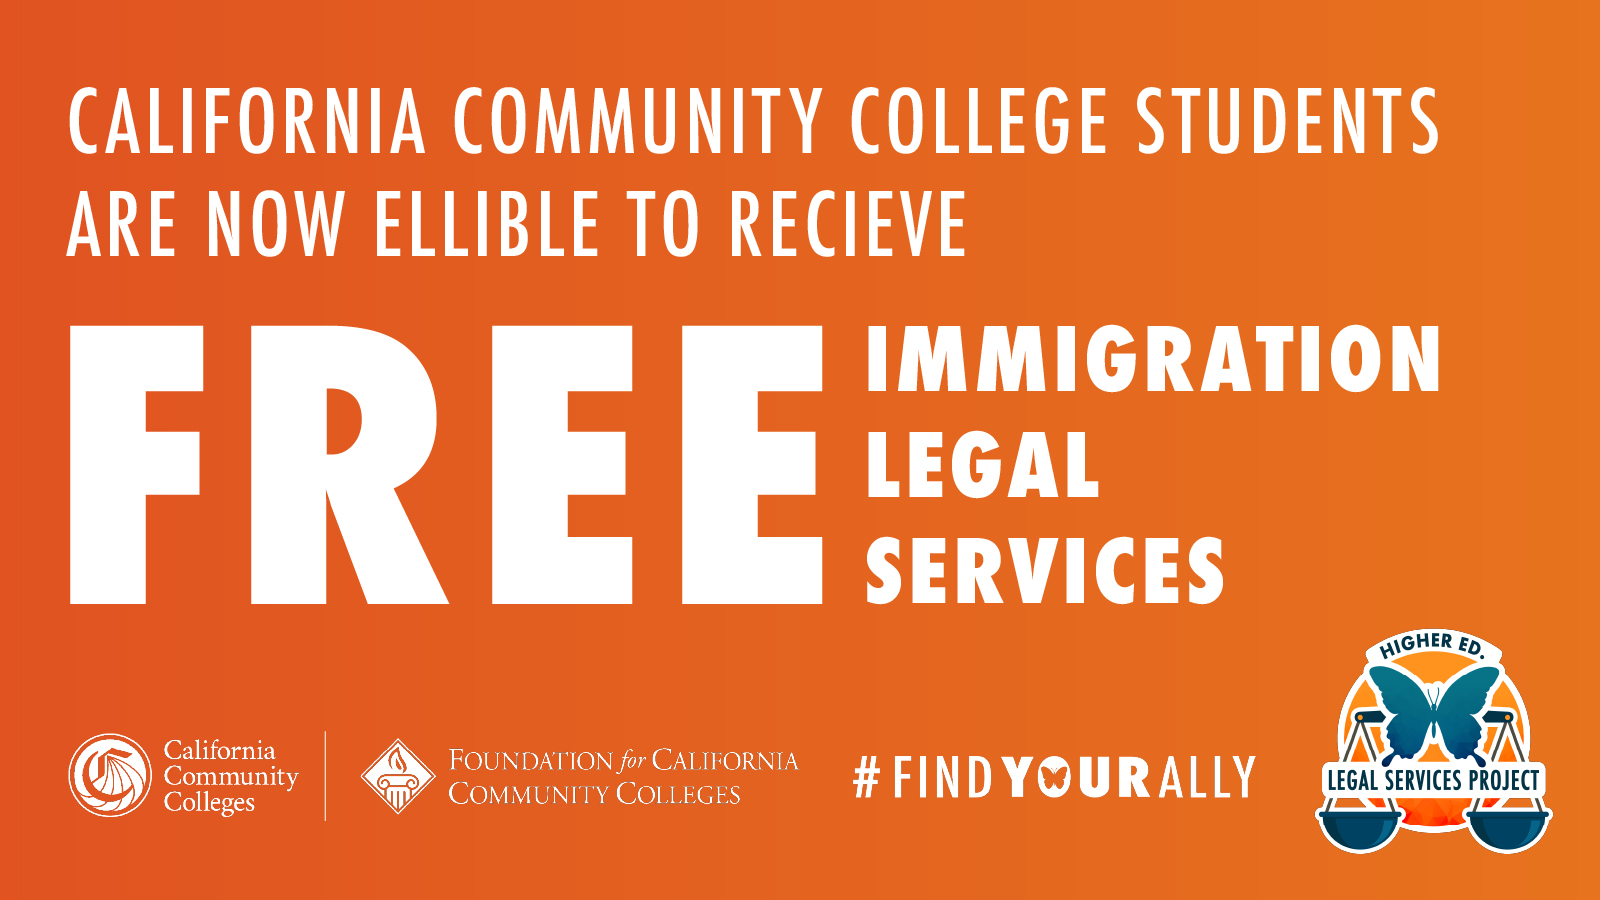 California Community College Students are Now Eligible to Receive FREE Immigration Legal Services